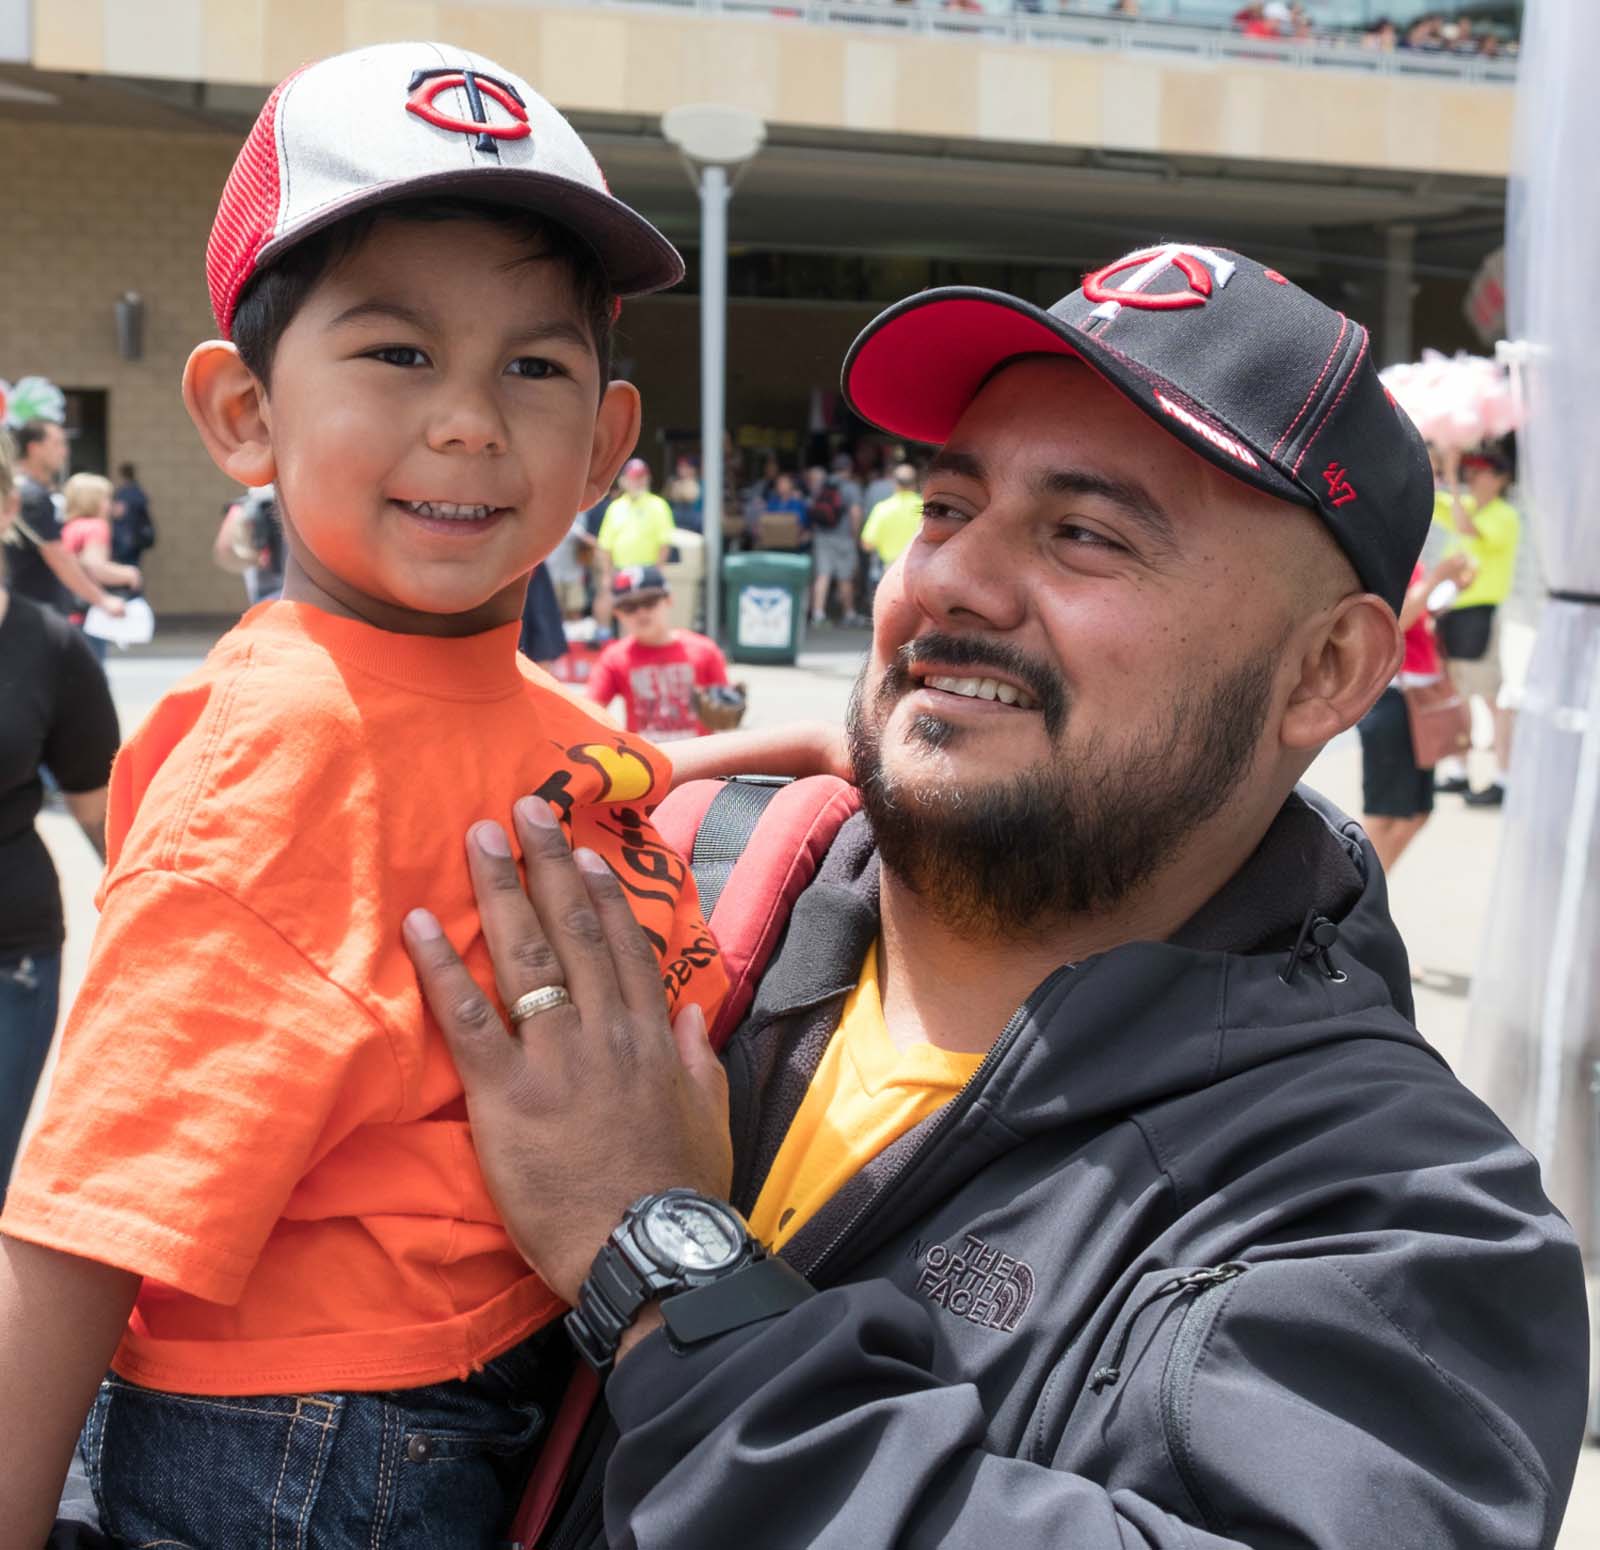 Mateo and his father at a baseball game